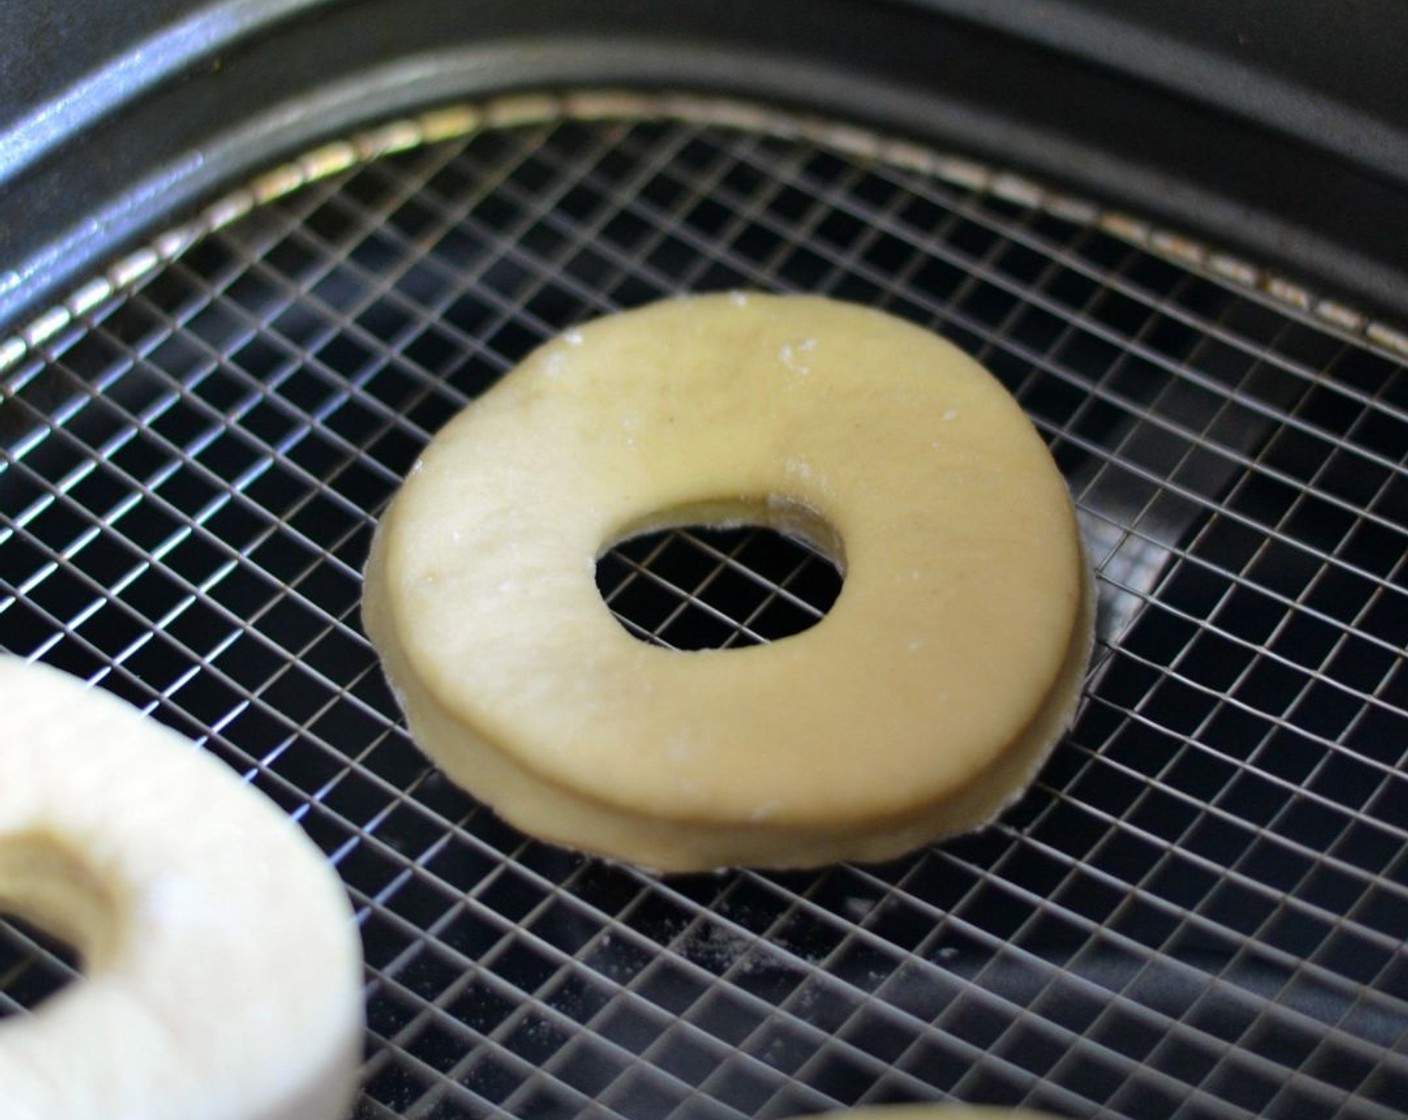 step 6 Heat up your air fryer to 355 degrees F (180 degrees C). Wait a minute, spray with Oil (as needed), then lay donuts gently at the bottom of the basket. Spray donuts with a light mist of oil, too (but that’s optional).